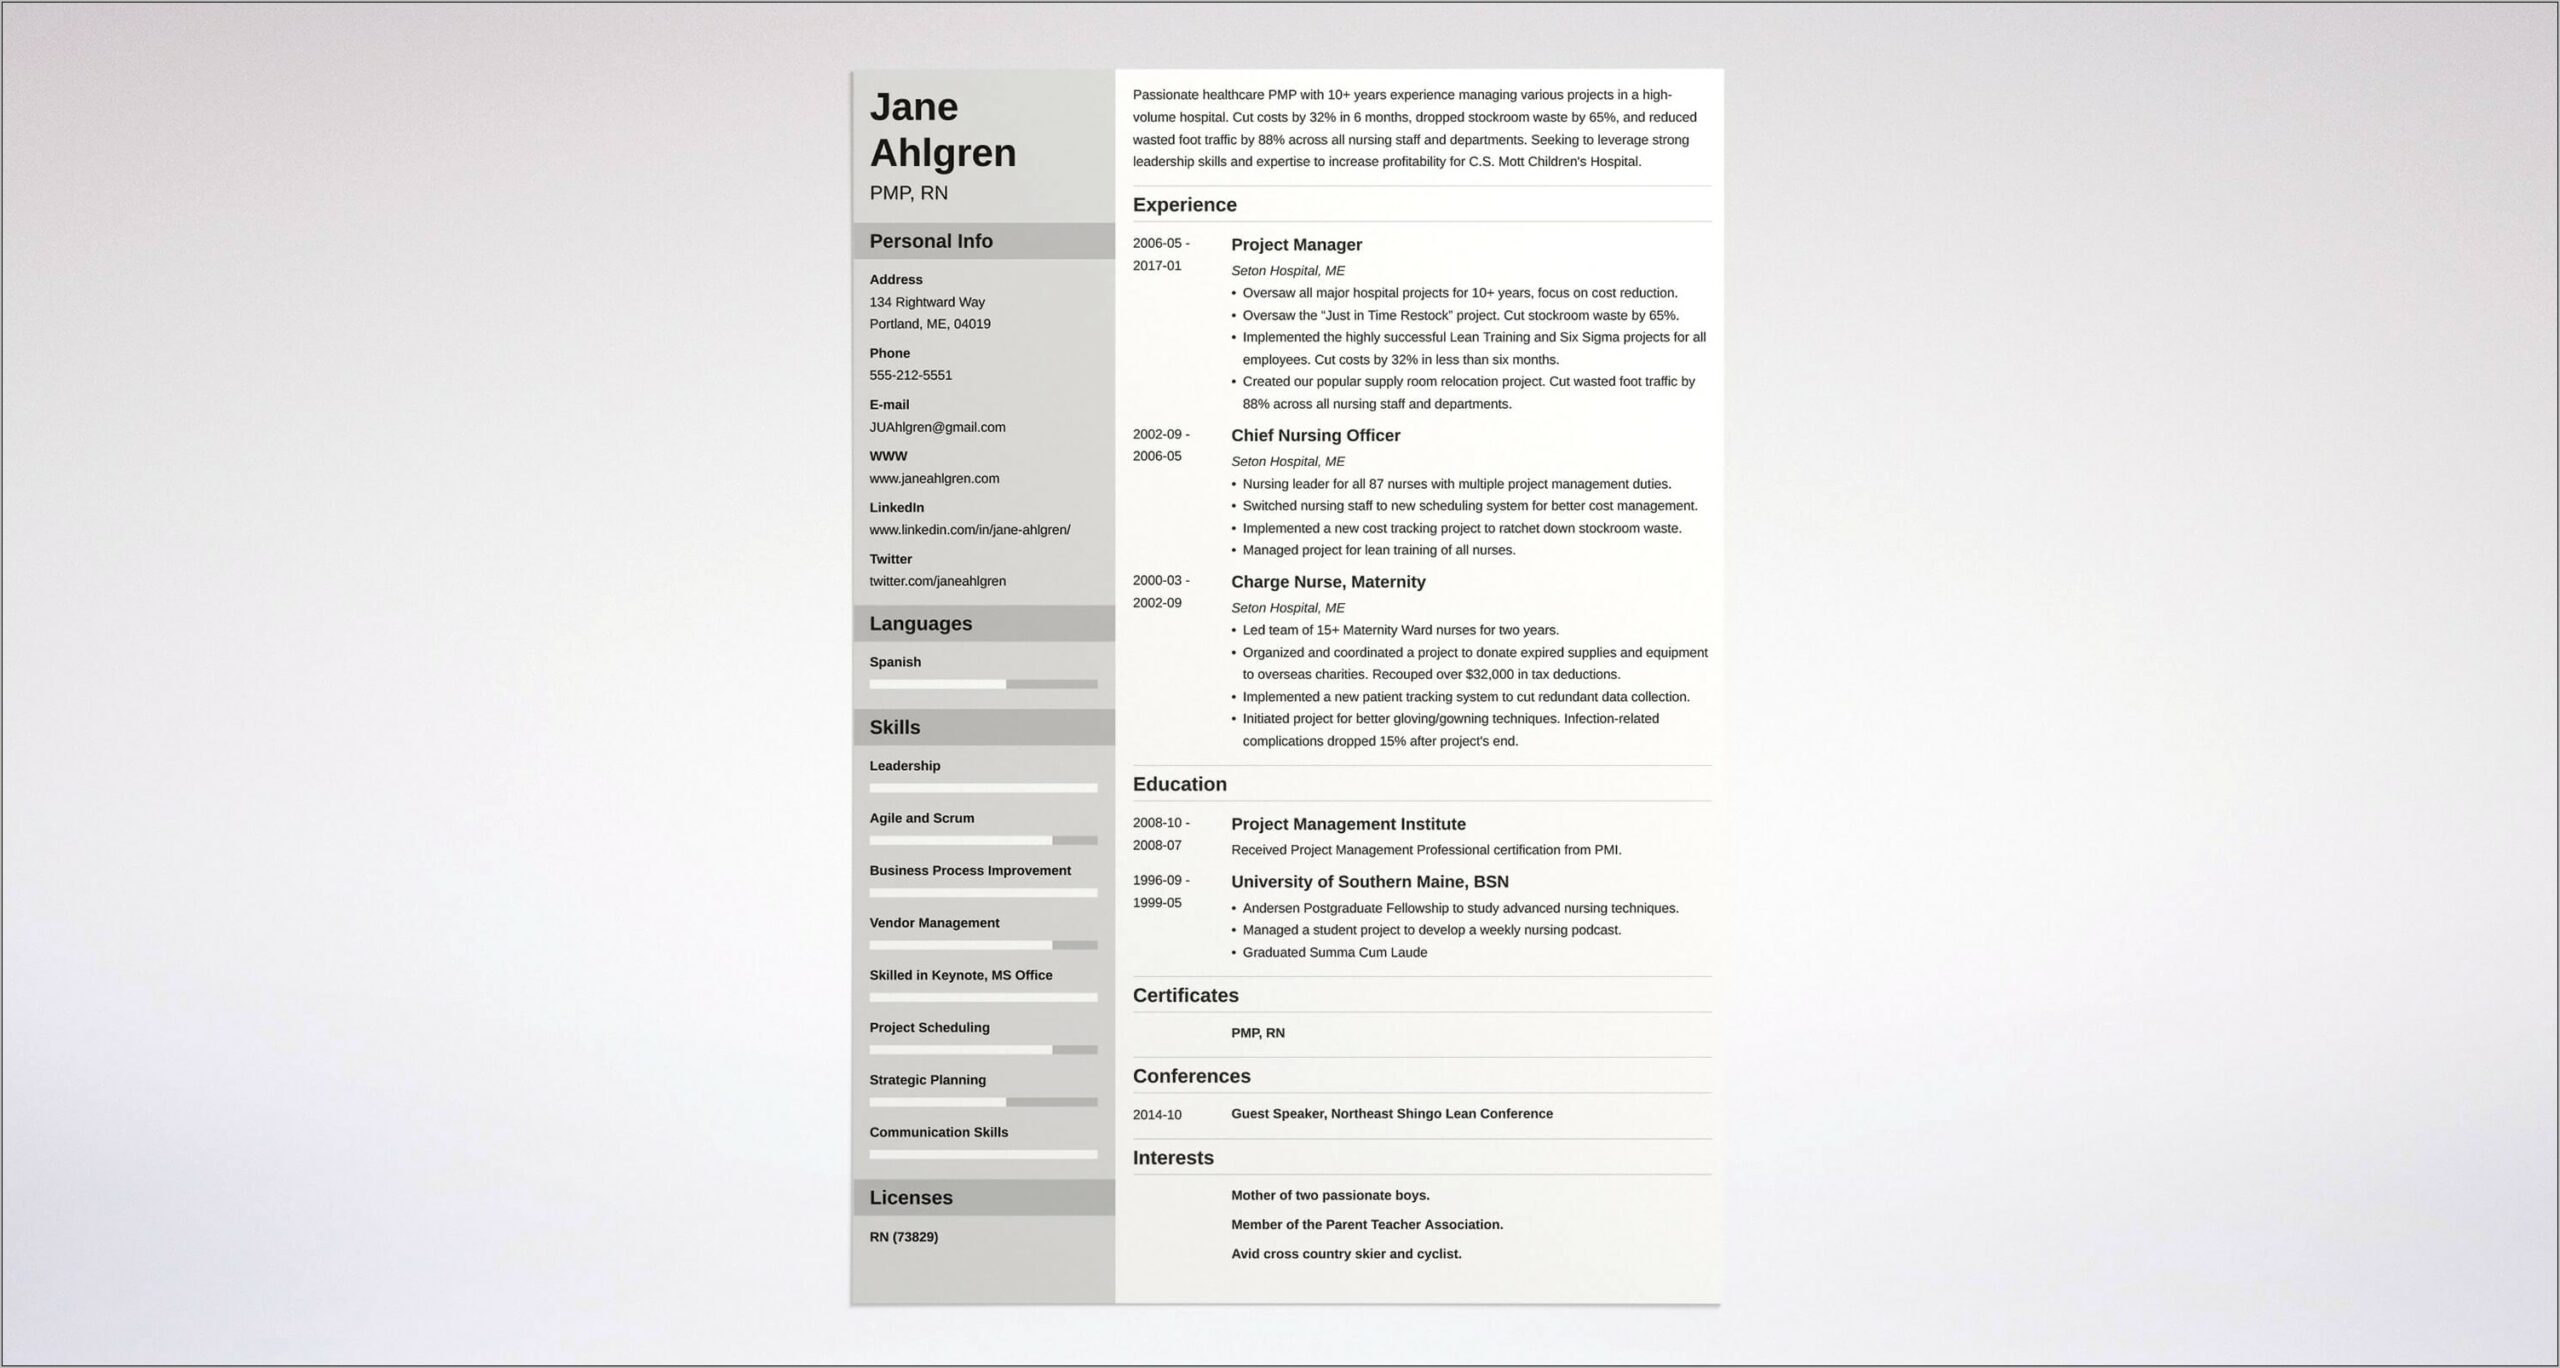 Project Manager Resume Sample Free Download